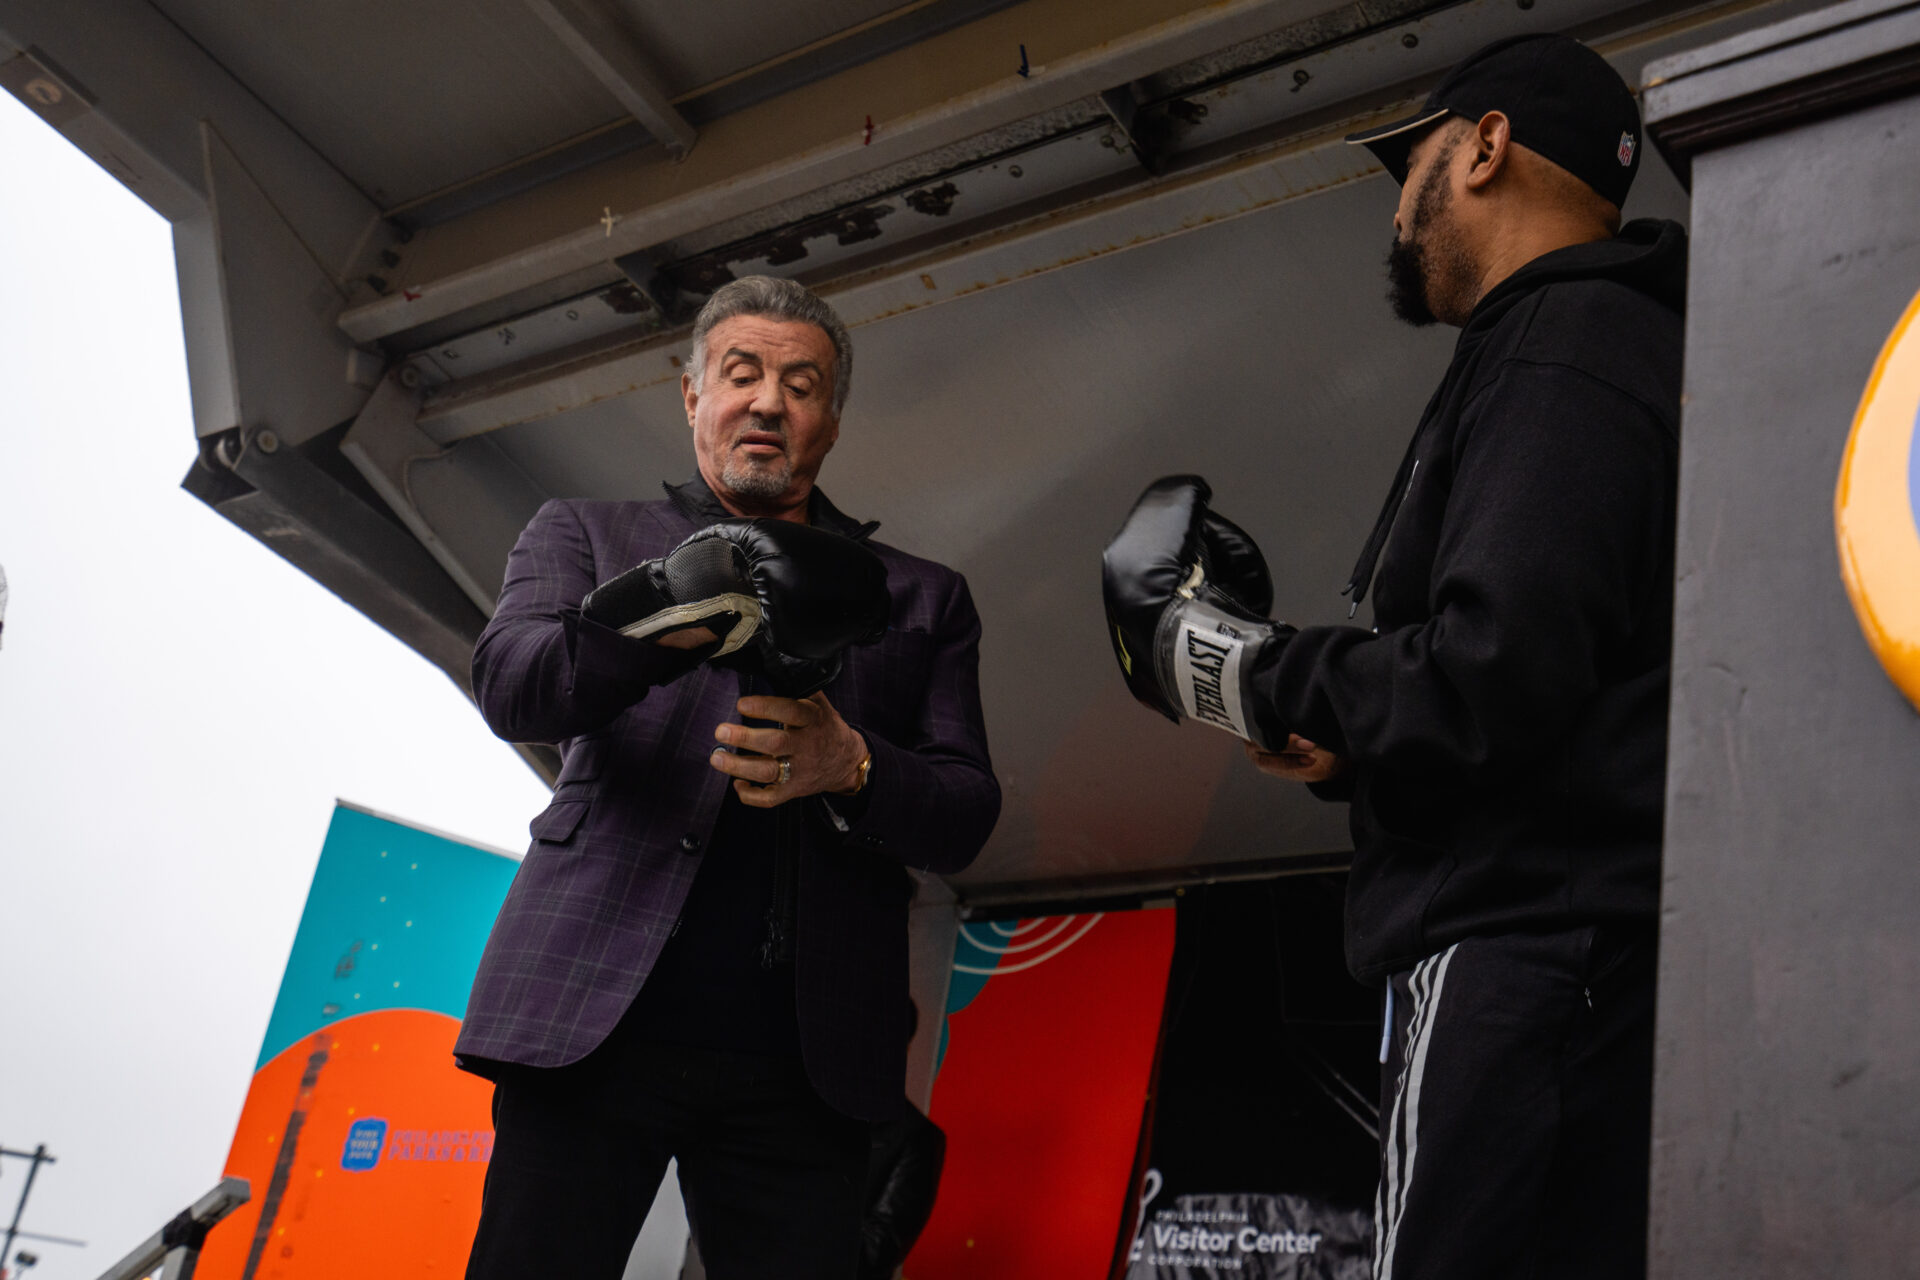 Sylvester Stallone attends Rocky Shop Grand Opening at Parkway Visitor Outpost